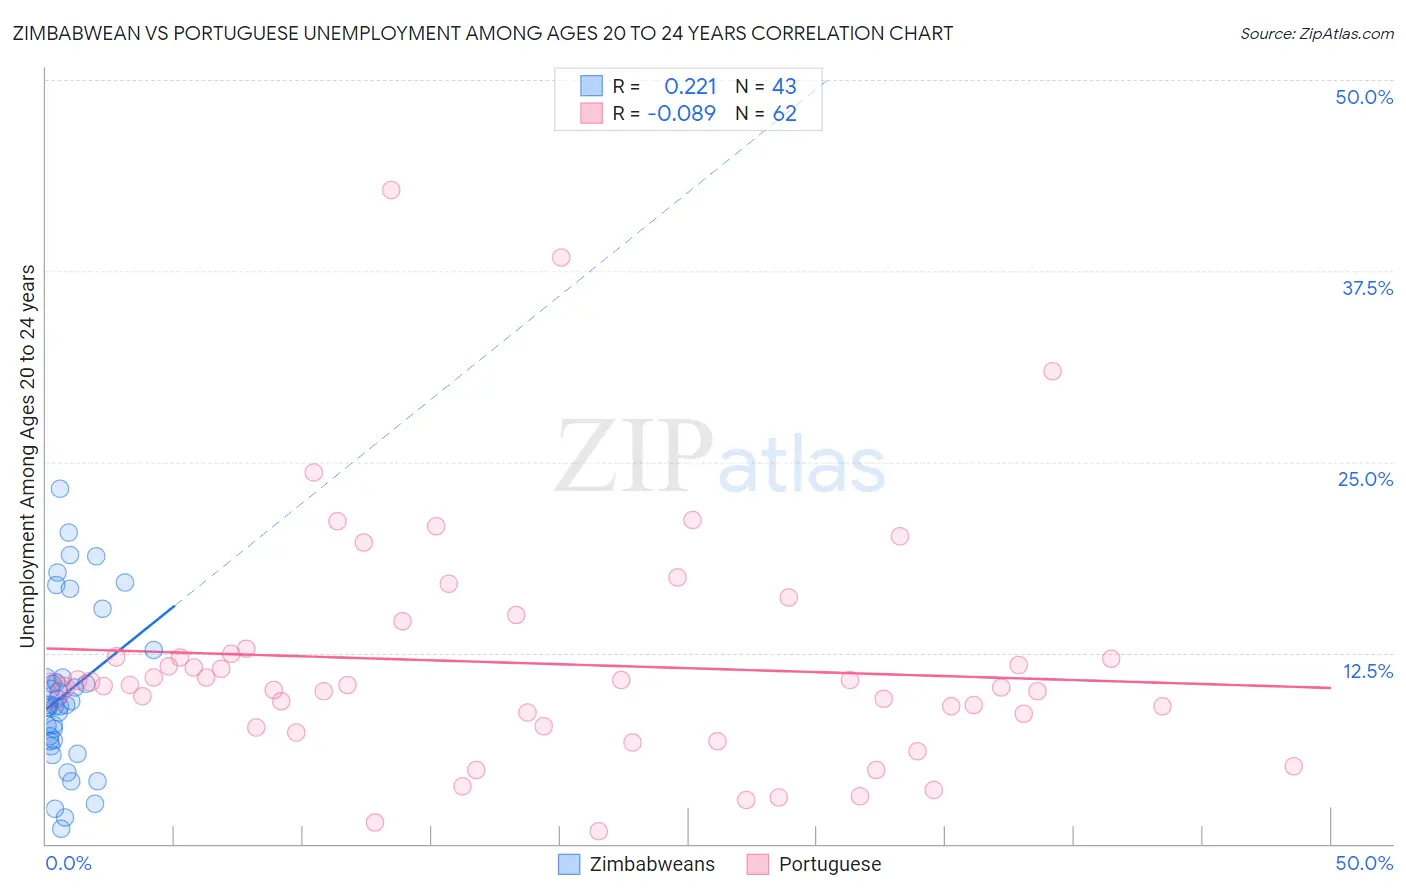 Zimbabwean vs Portuguese Unemployment Among Ages 20 to 24 years